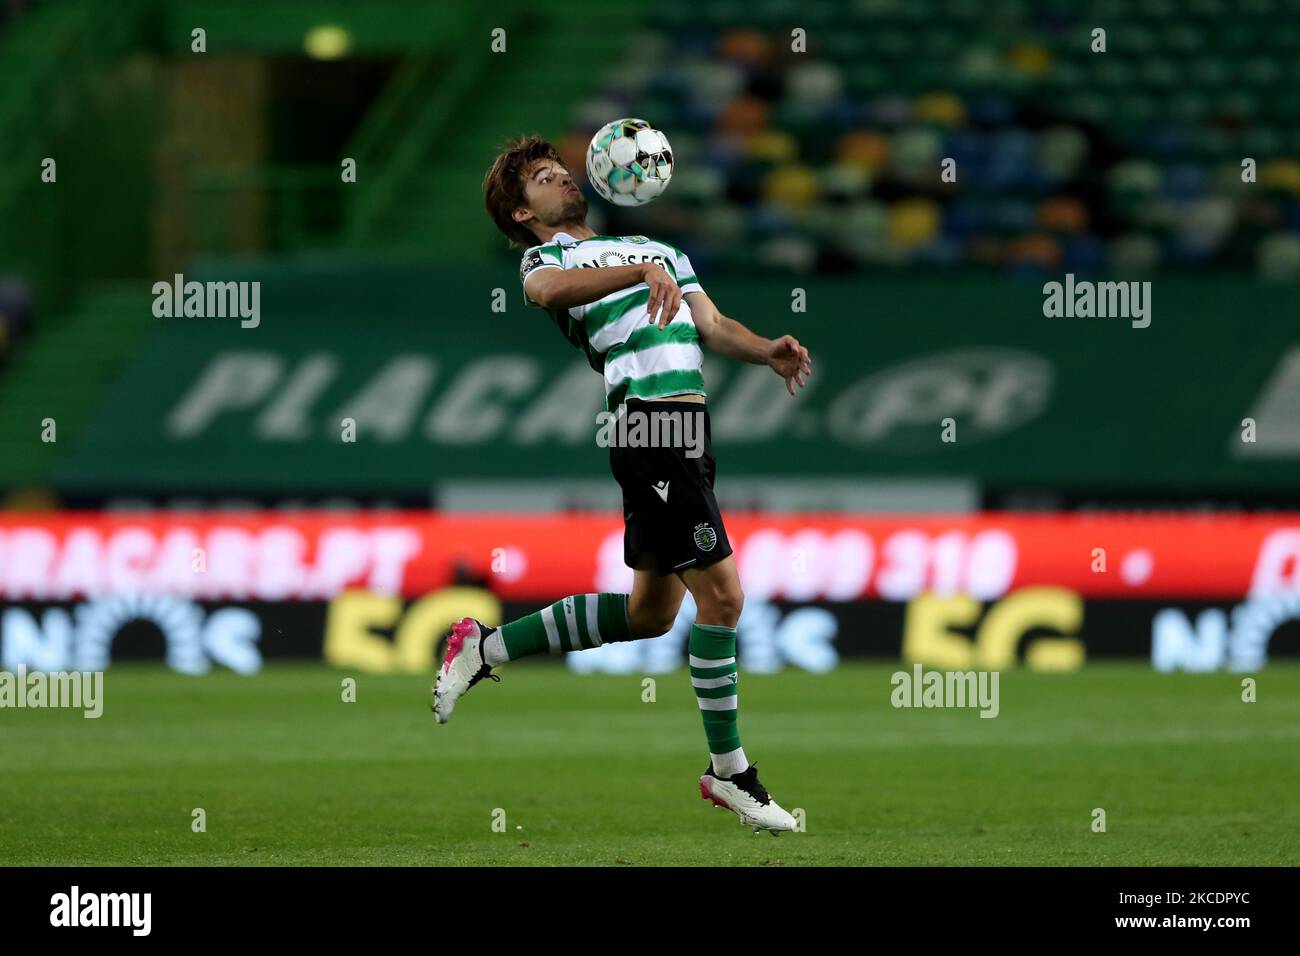 Daniel Braganca of Sporting CP in action during the Portuguese League football match between Sporting CP and CD Nacional at Jose Alvalade stadium in Lisbon, Portugal on May 1, 2021. (Photo by Pedro FiÃºza/NurPhoto) Stock Photo